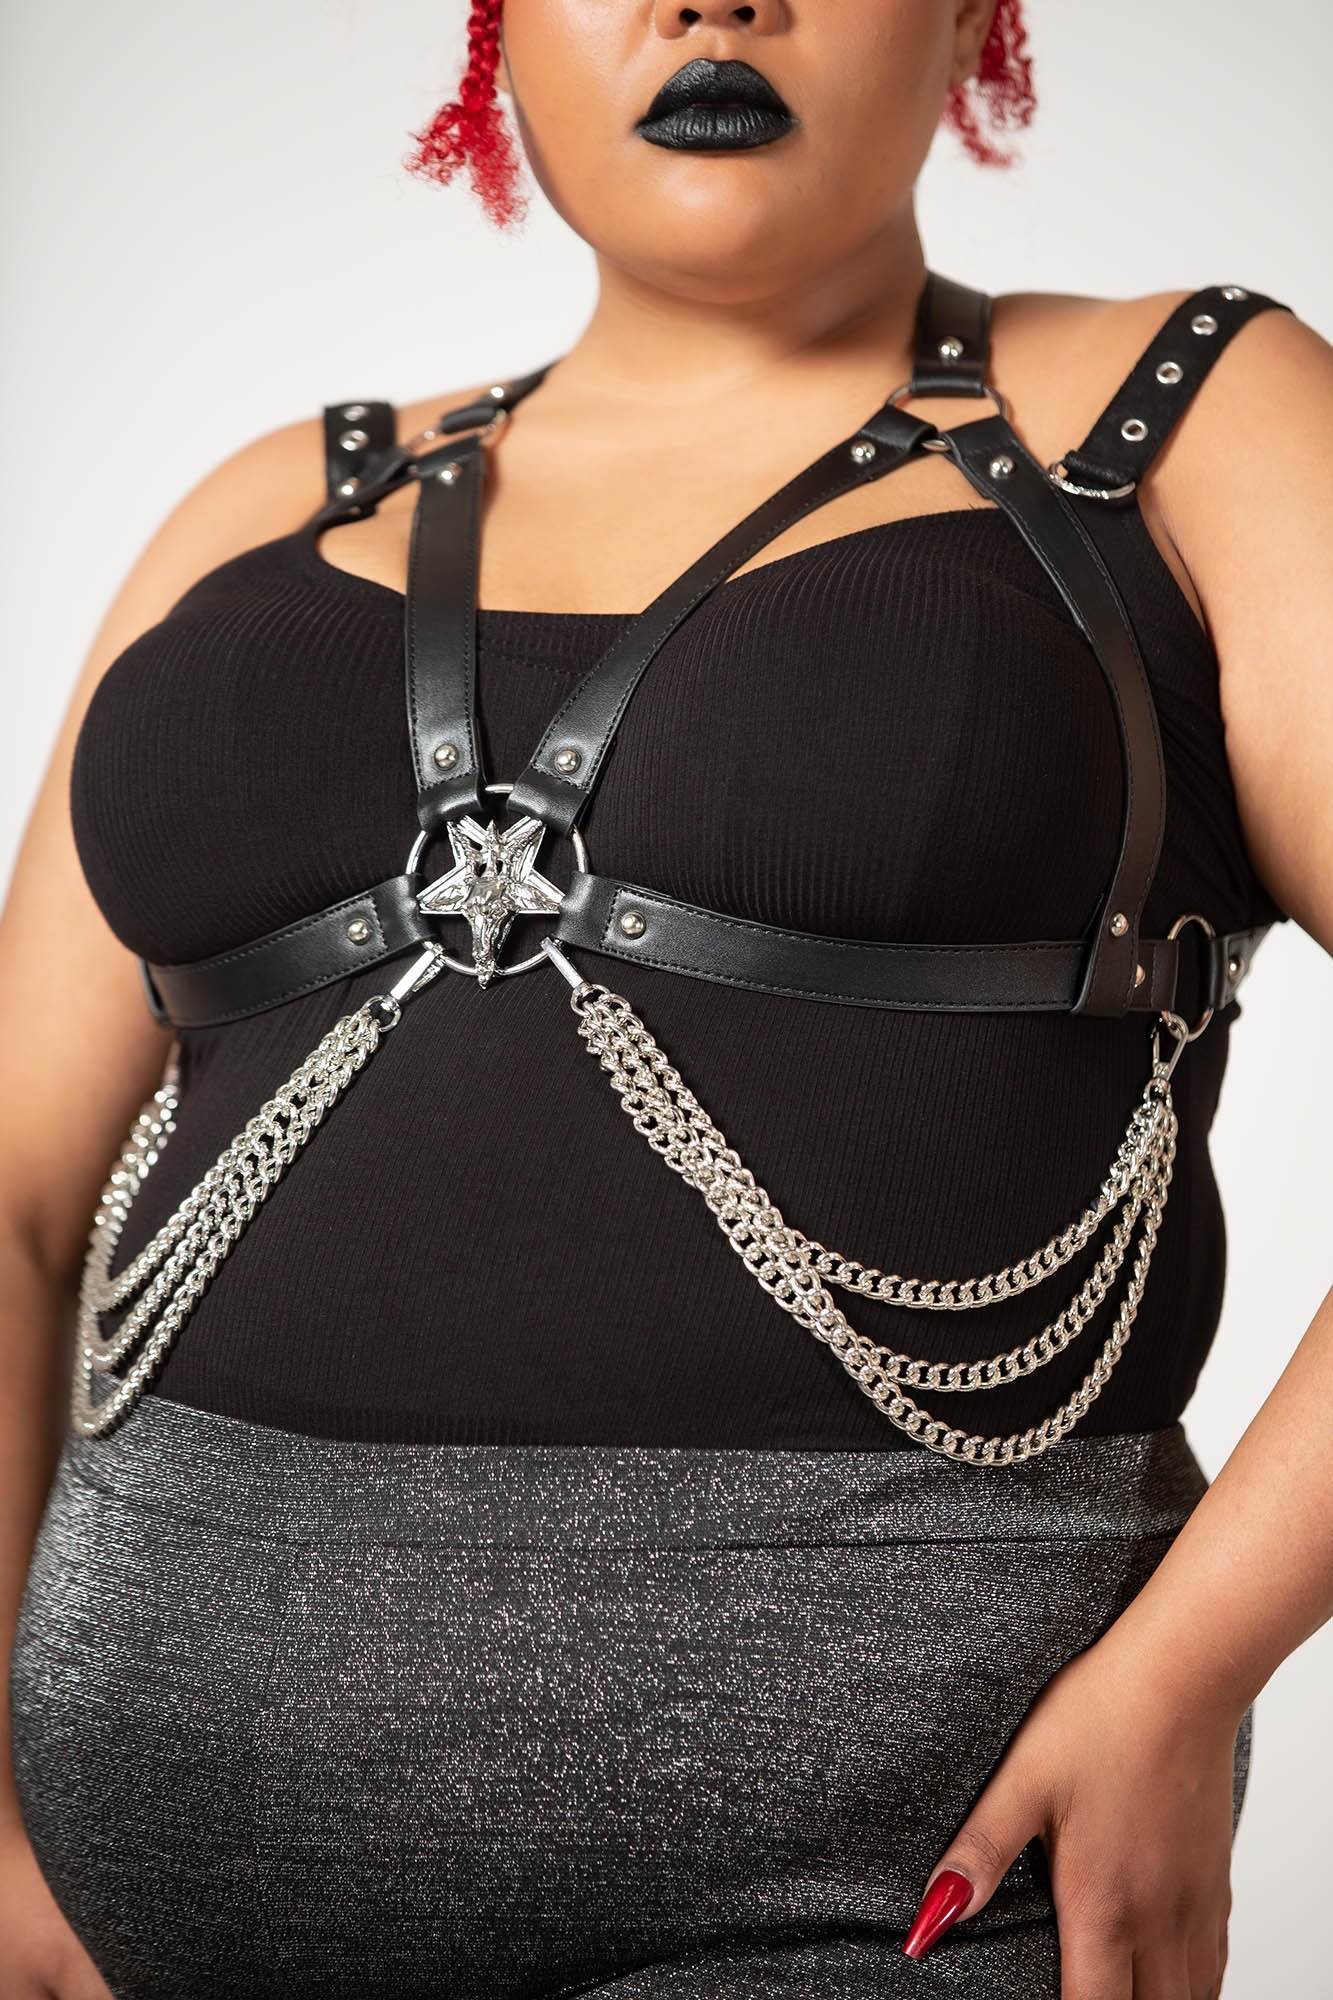 How Wearable Is The Leather Harness Fashion Trend?